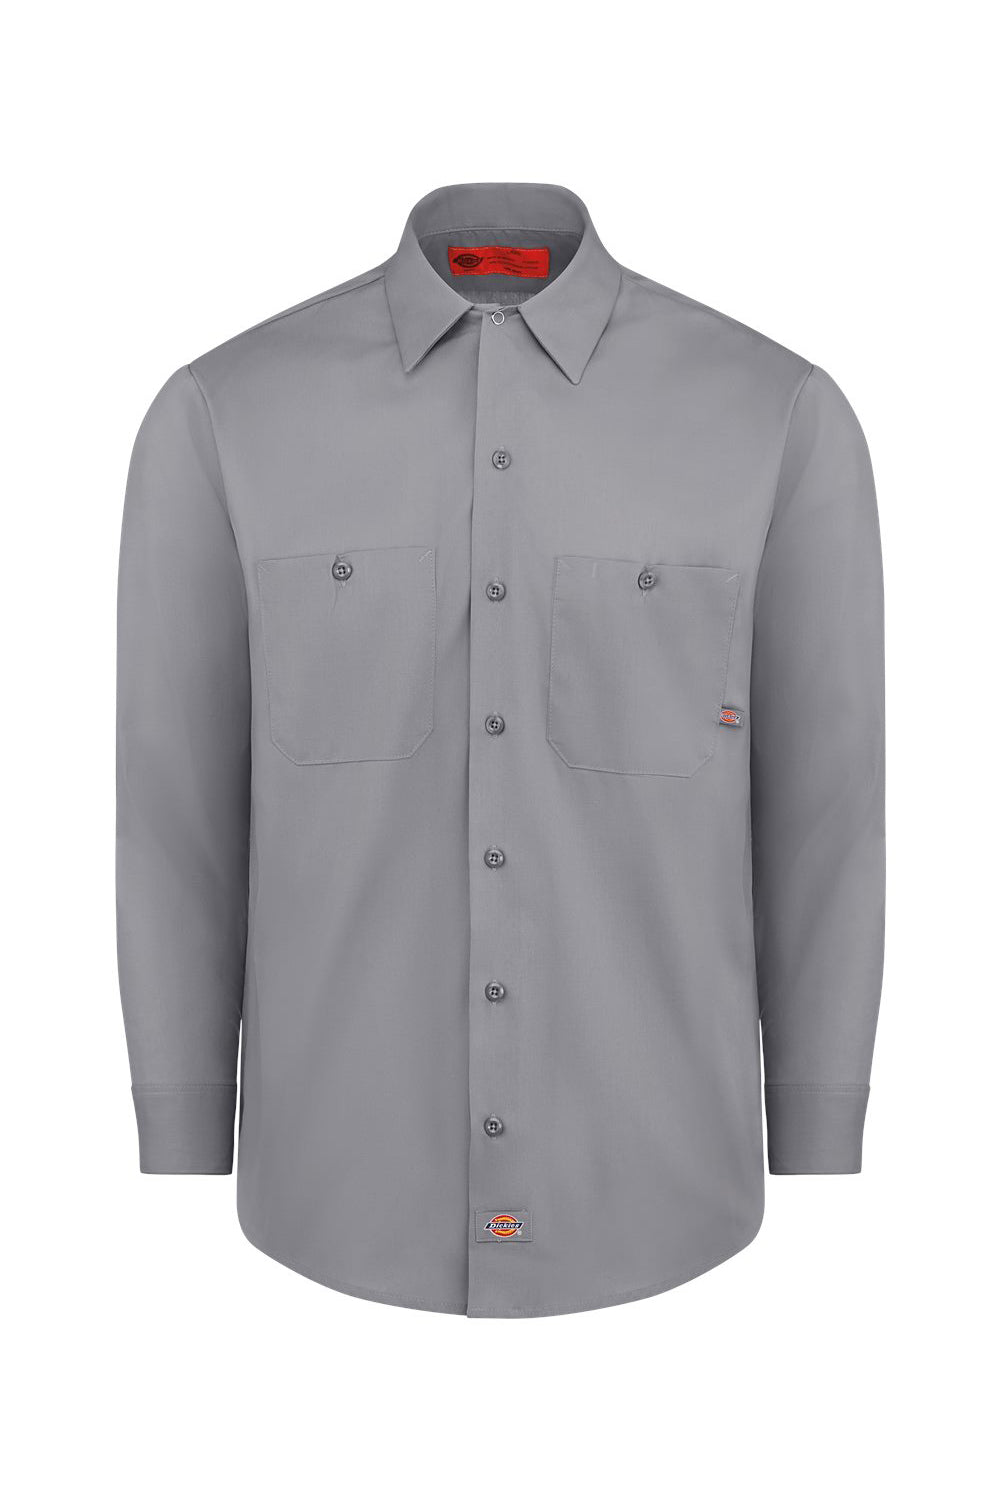 Dickies L535 Mens Industrial Wrinkle Resistant Long Sleeve Button Down Work Shirt w/ Double Pockets Graphite Grey Flat Front